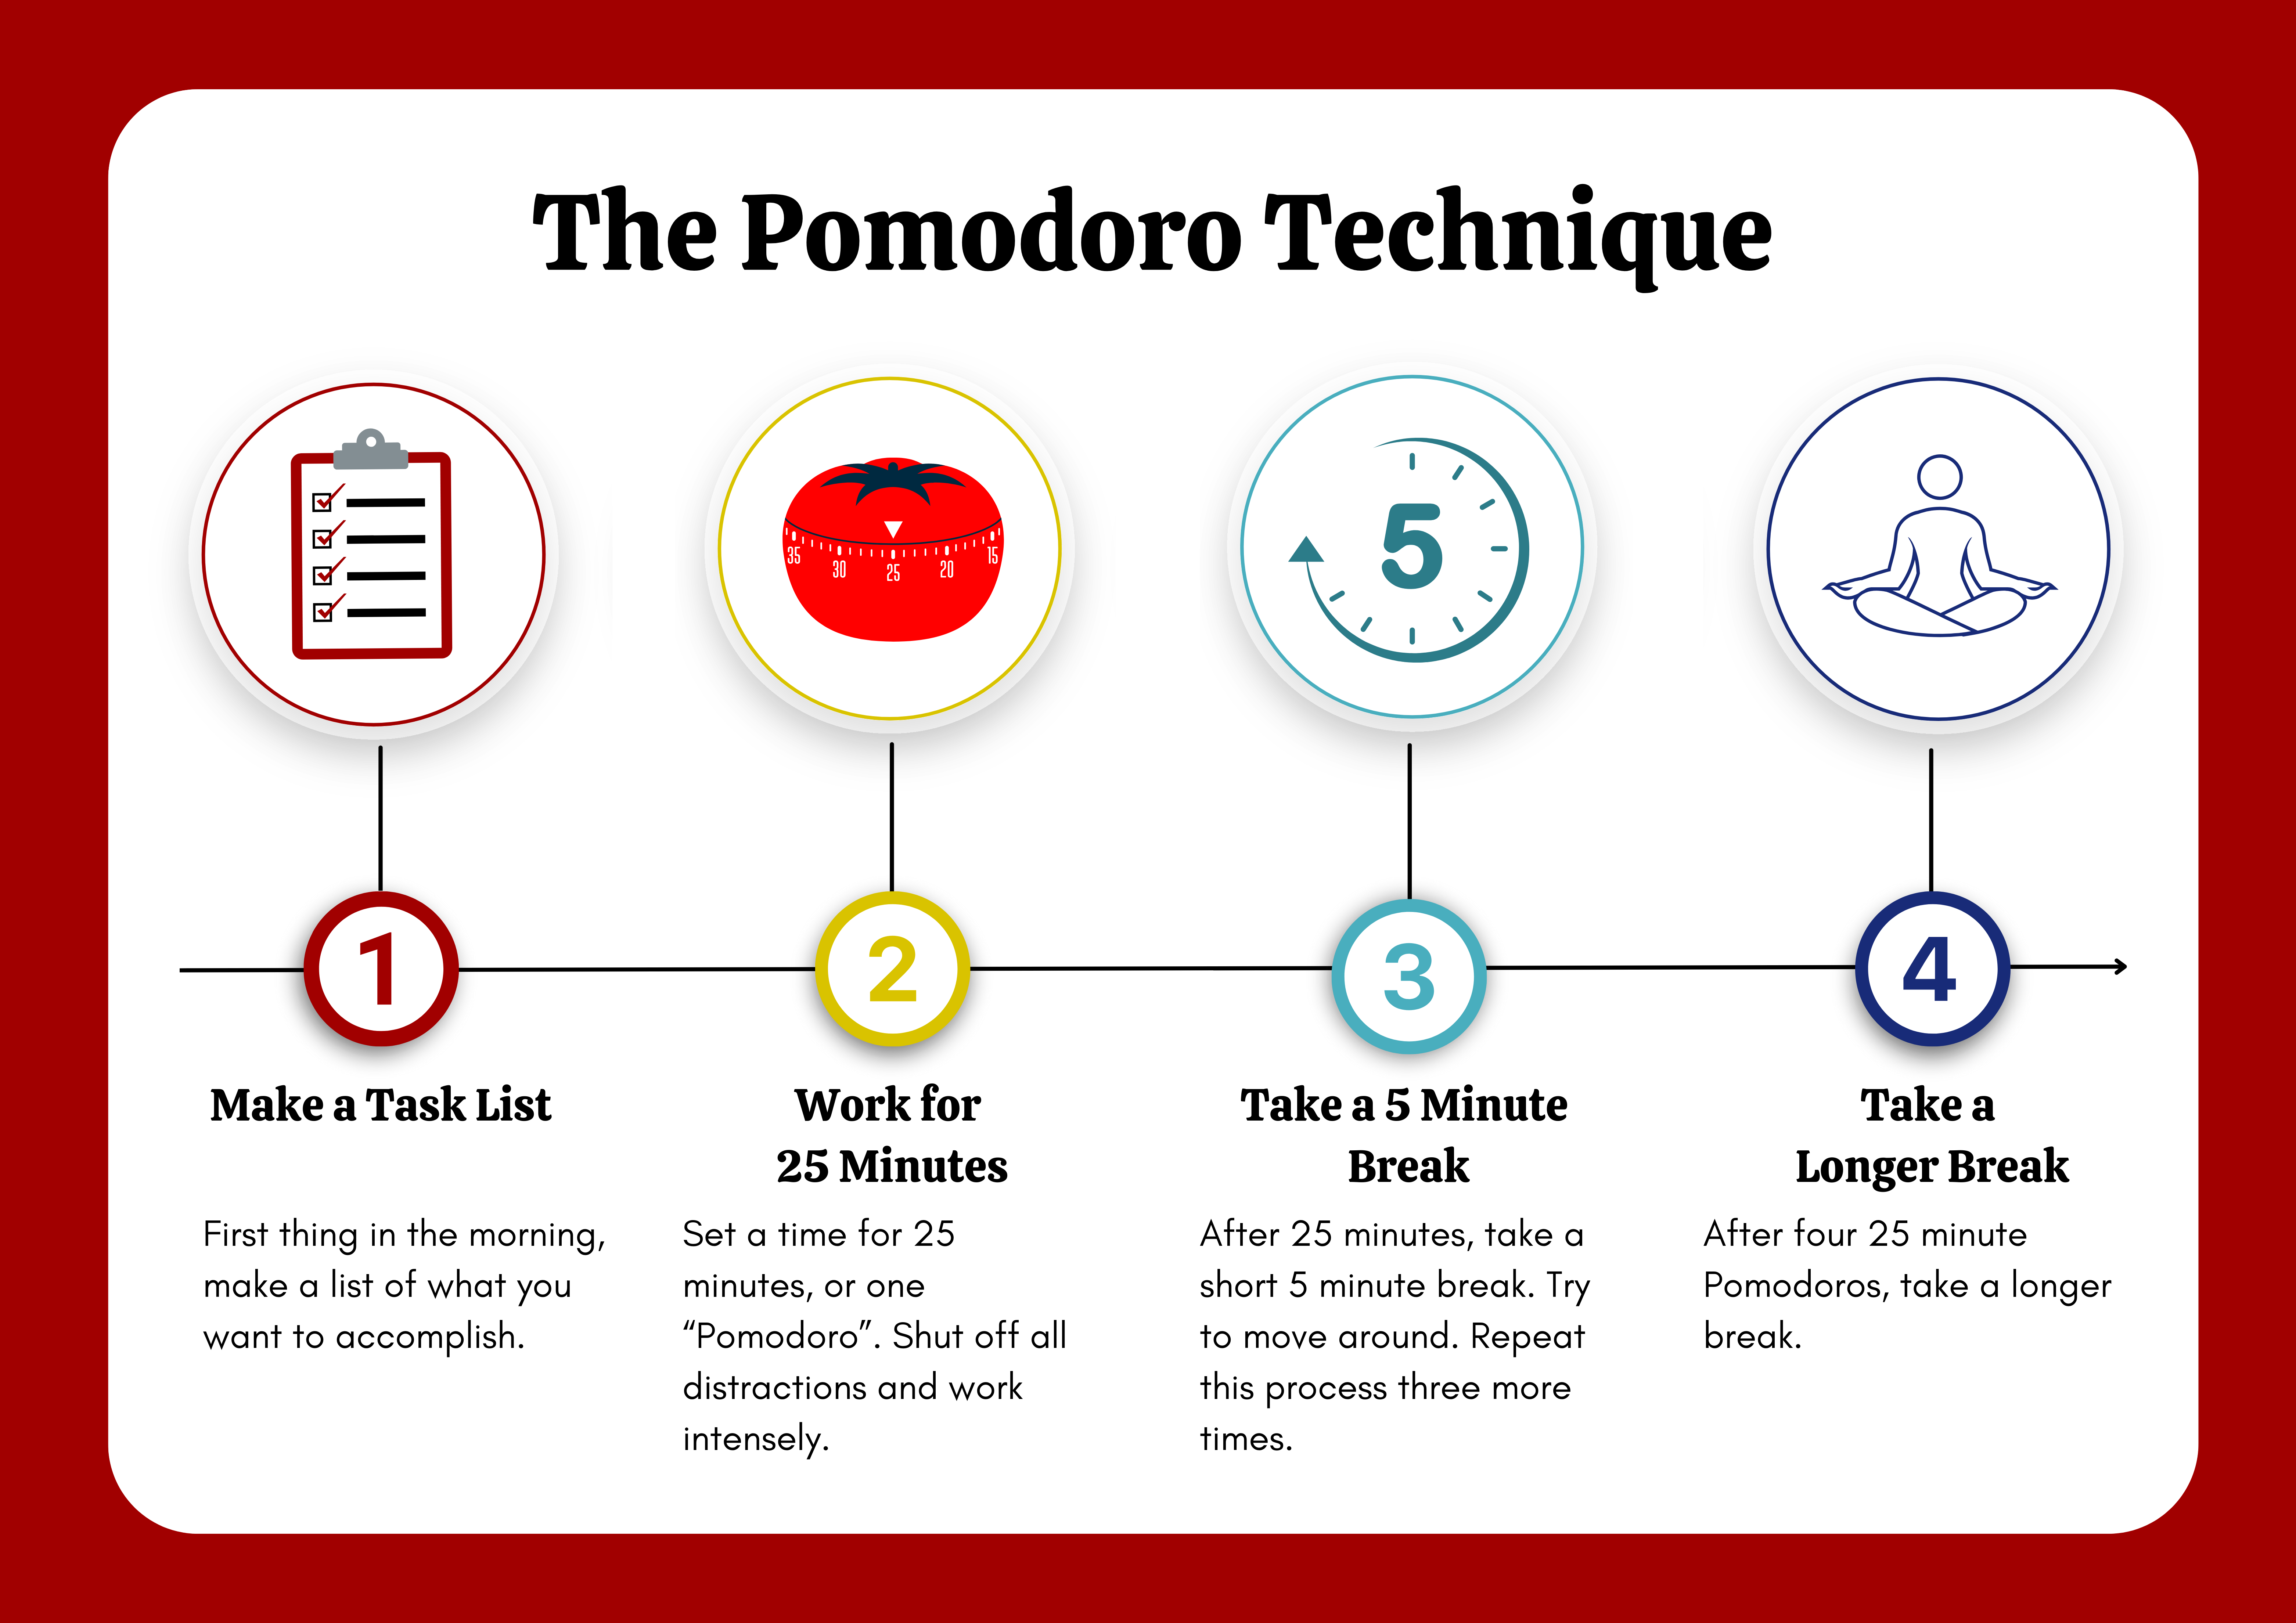 Infographic depicting the 4 steps of the Pomodoro Technique with text description below.